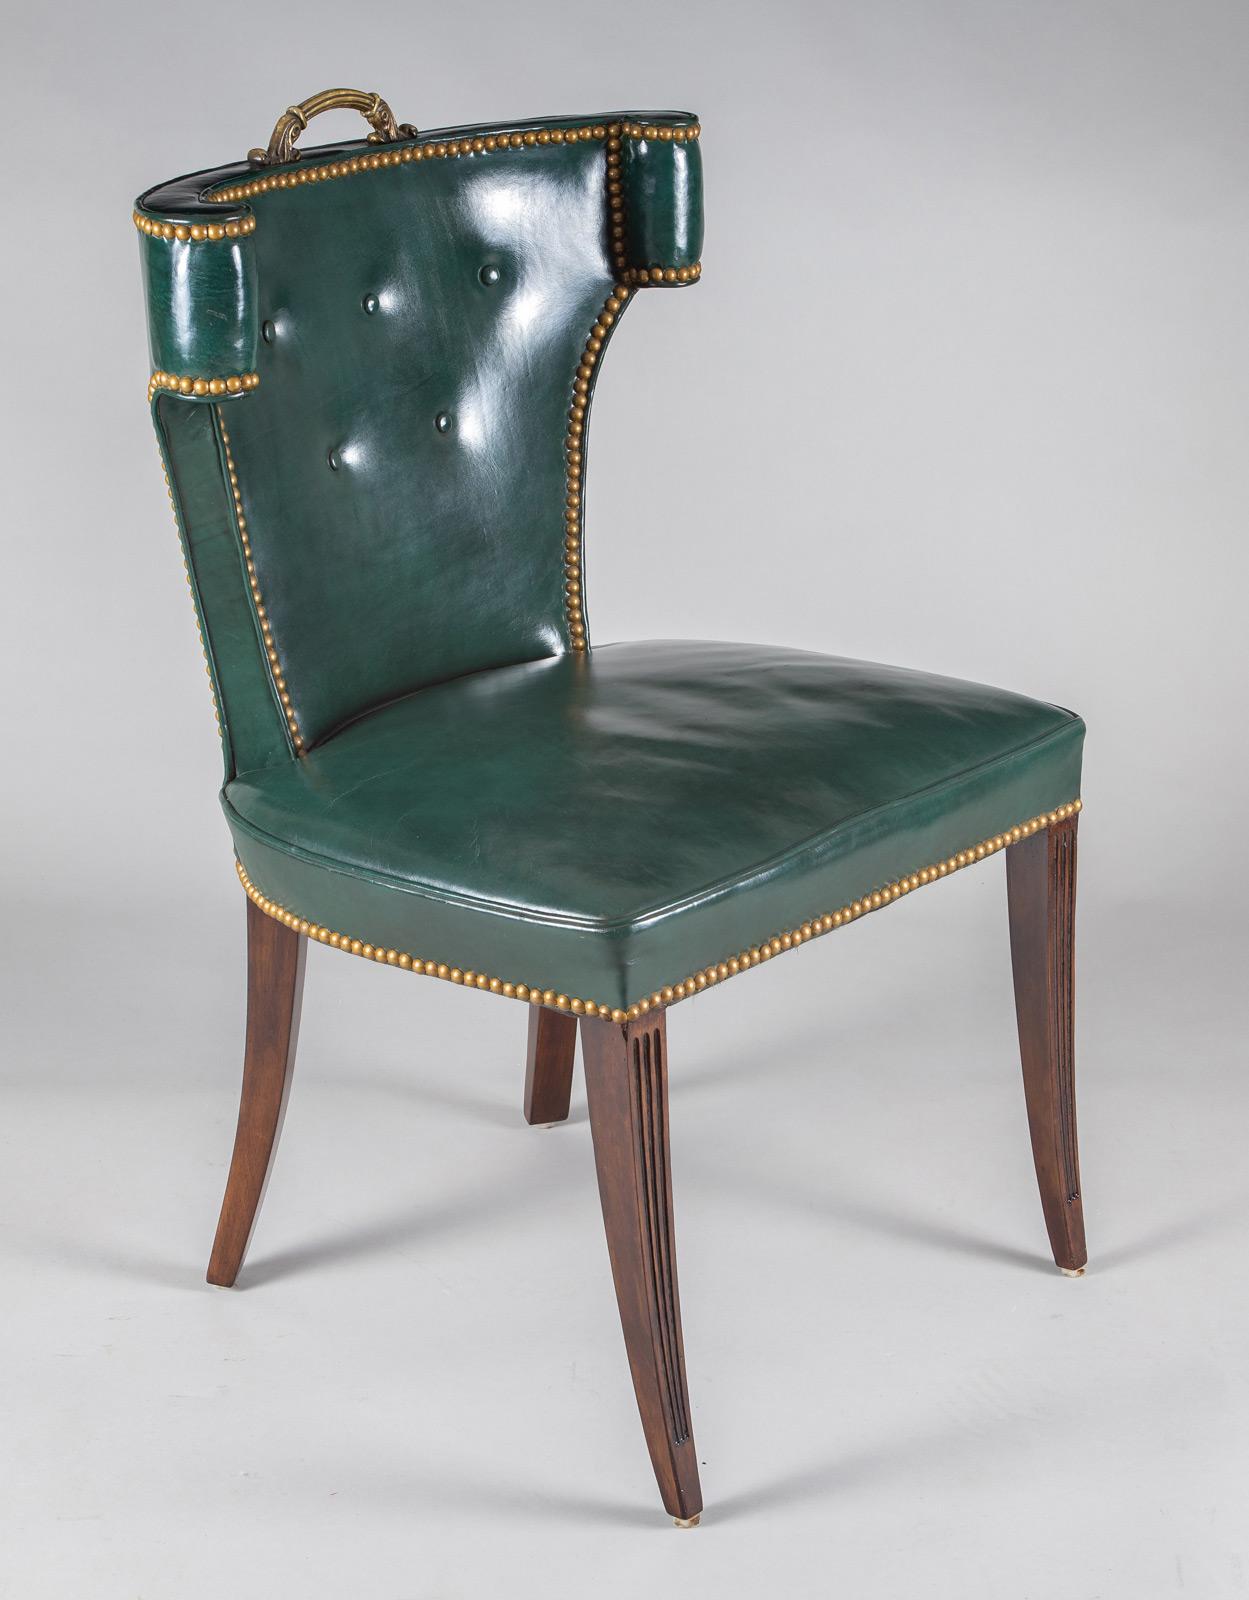 Vintage green leather side or desk chair with a curved and scrolled “semi-wing” back, a brass handle affixed at the top, the leather back with five buttons, tight seat, the unusual design outlined with brass nail heads, supported on fluted mahogany